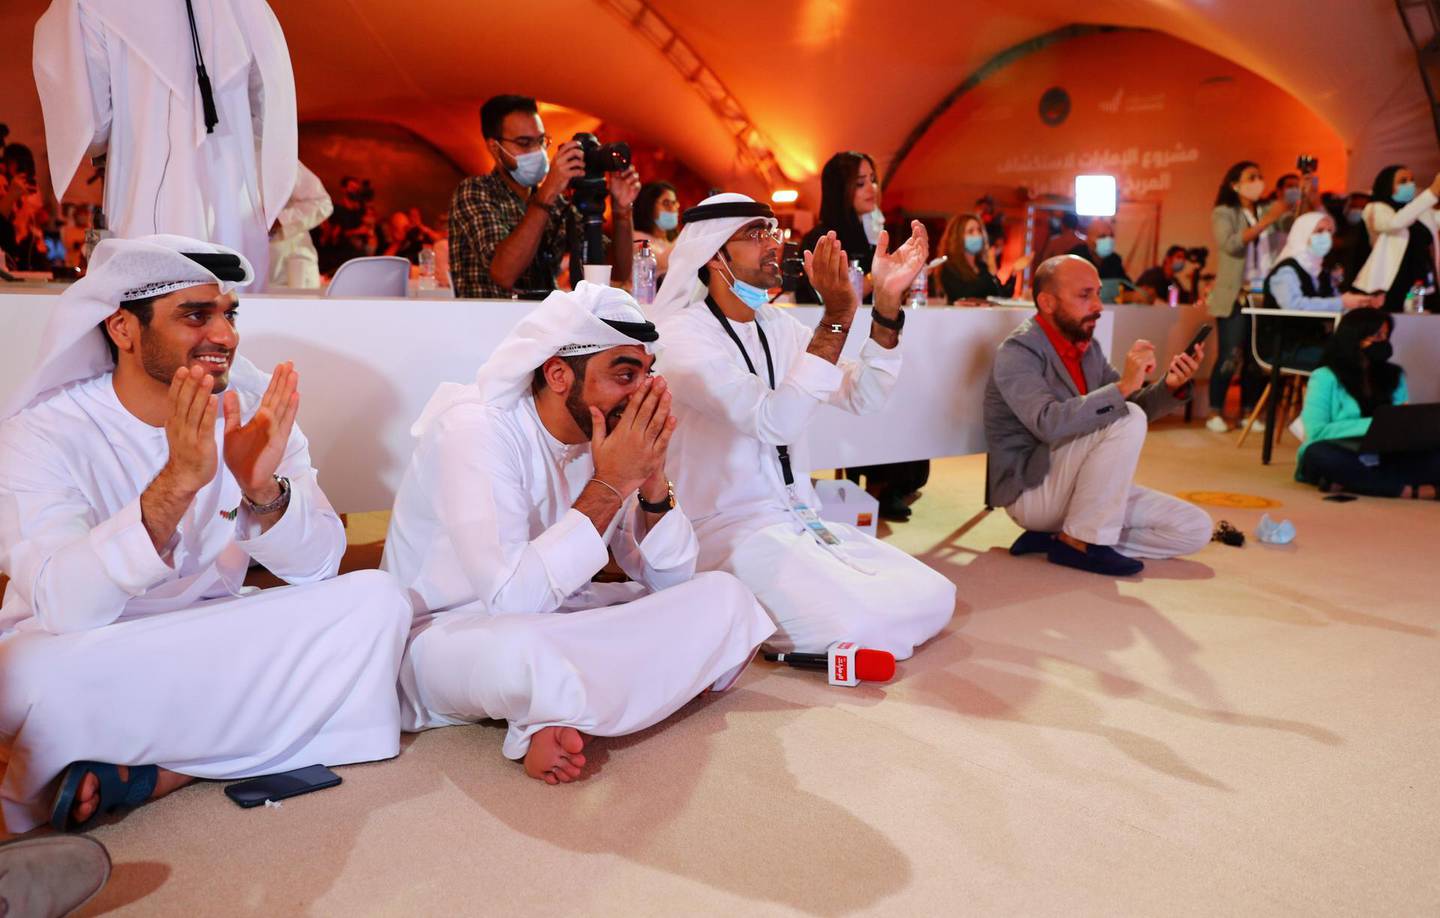 People react as they watch a big screen displaying the launch of the Hope Probe from Tanegashima Island in Japan, at the Mohammed bin Rashid Space Centre in Dubai, United Arab Emirates July 20, 2020. REUTERS/Ahmed Jadallah